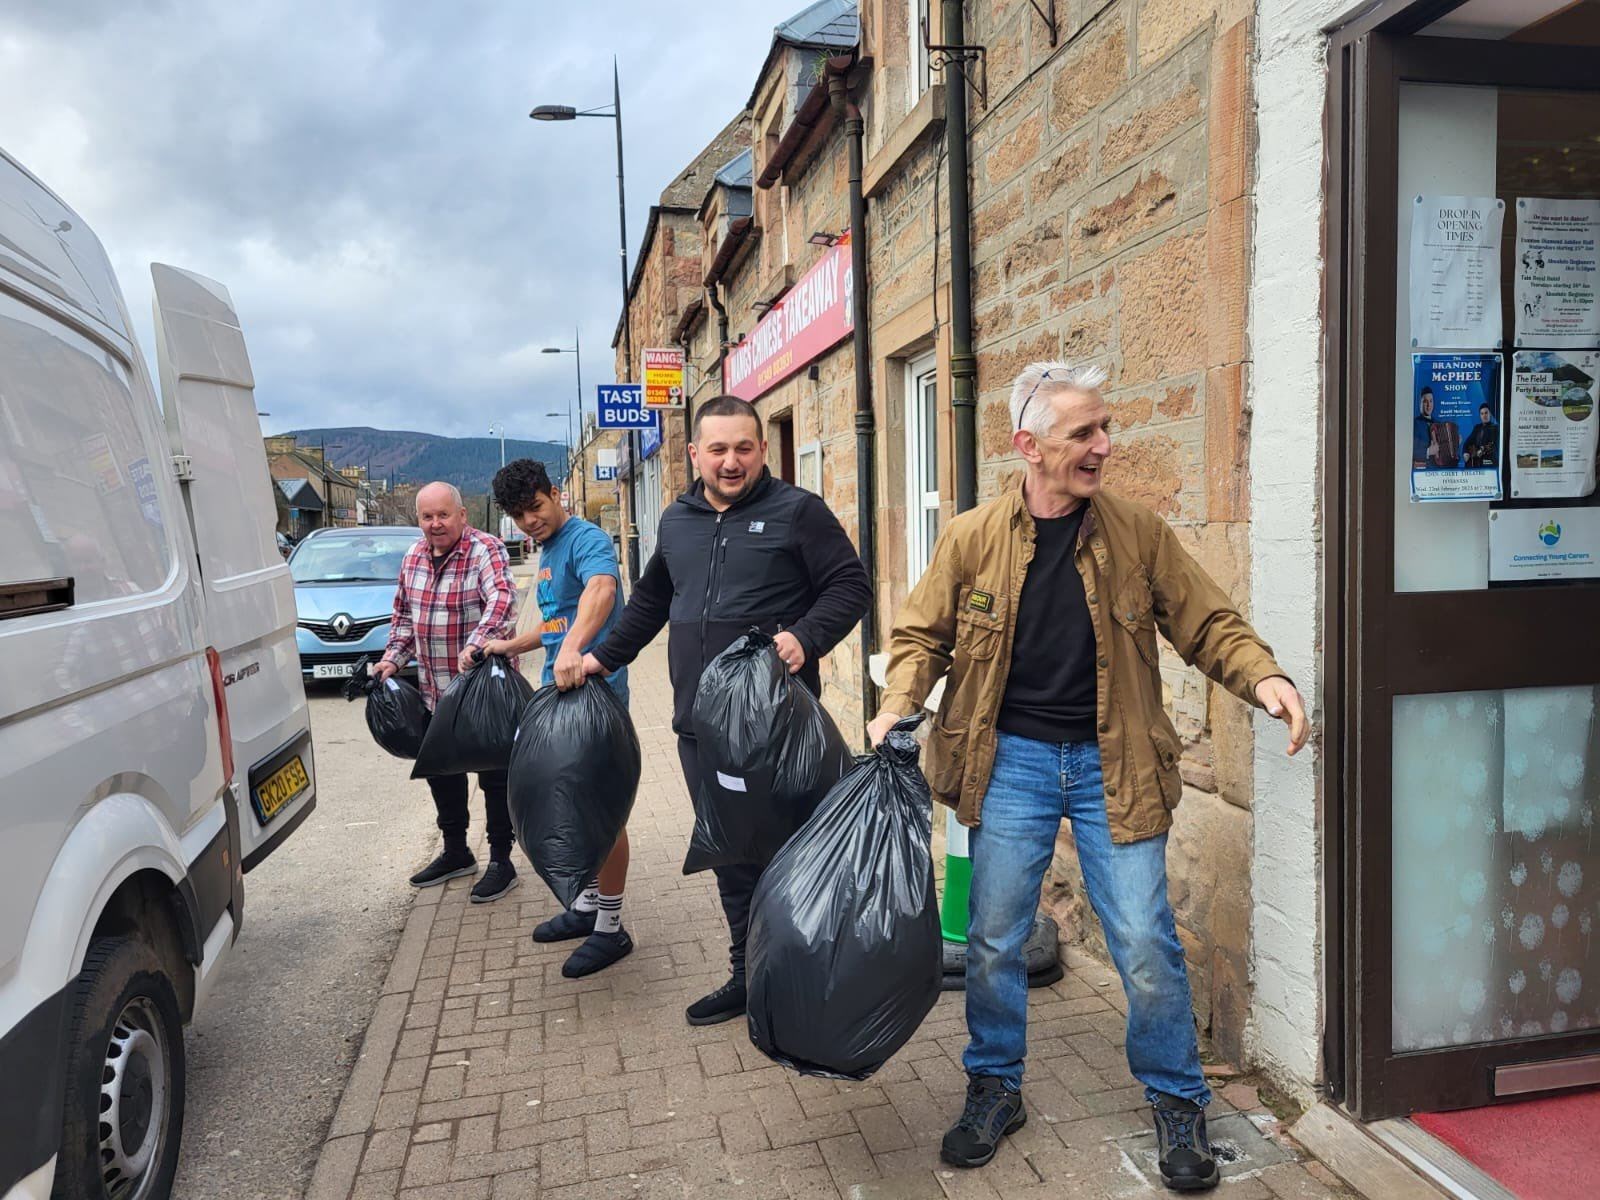 Gordon Robertson (from left), Shadi Ali, Serhat Yavuz and John Douglas form a human chain to load goods donated at The Place for the earthquake relief.